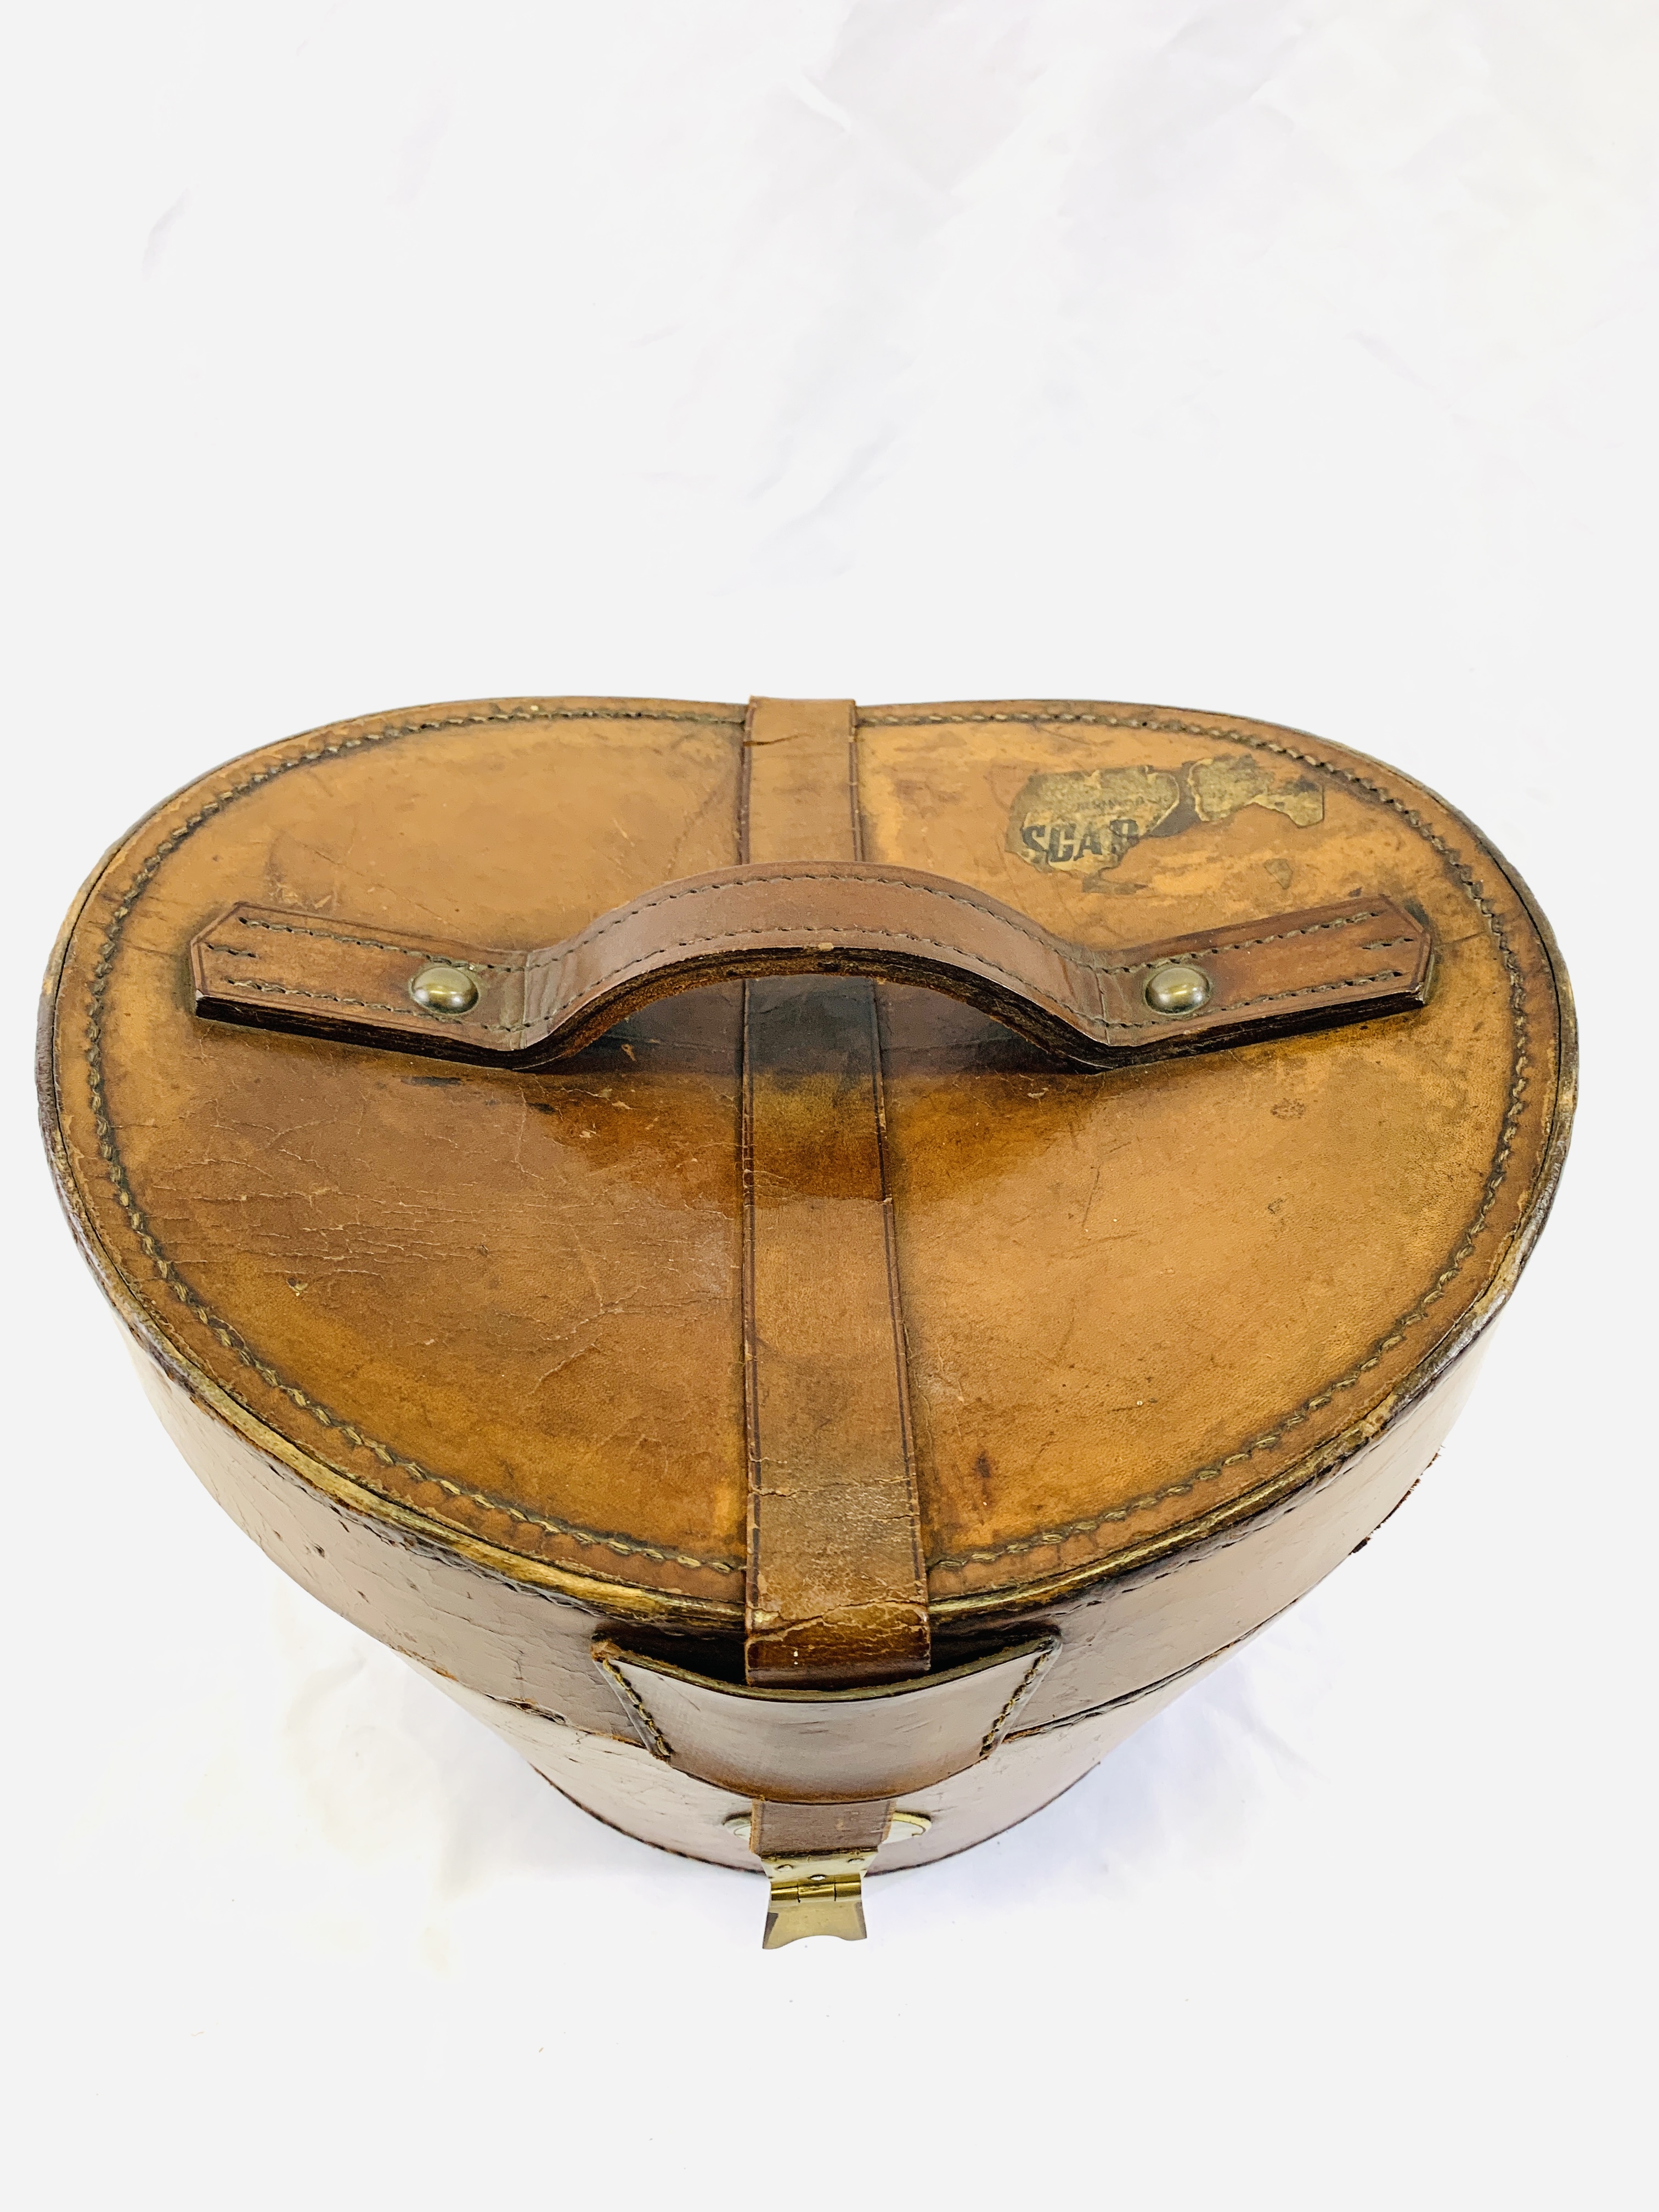 Brown leather hat box - Image 2 of 5